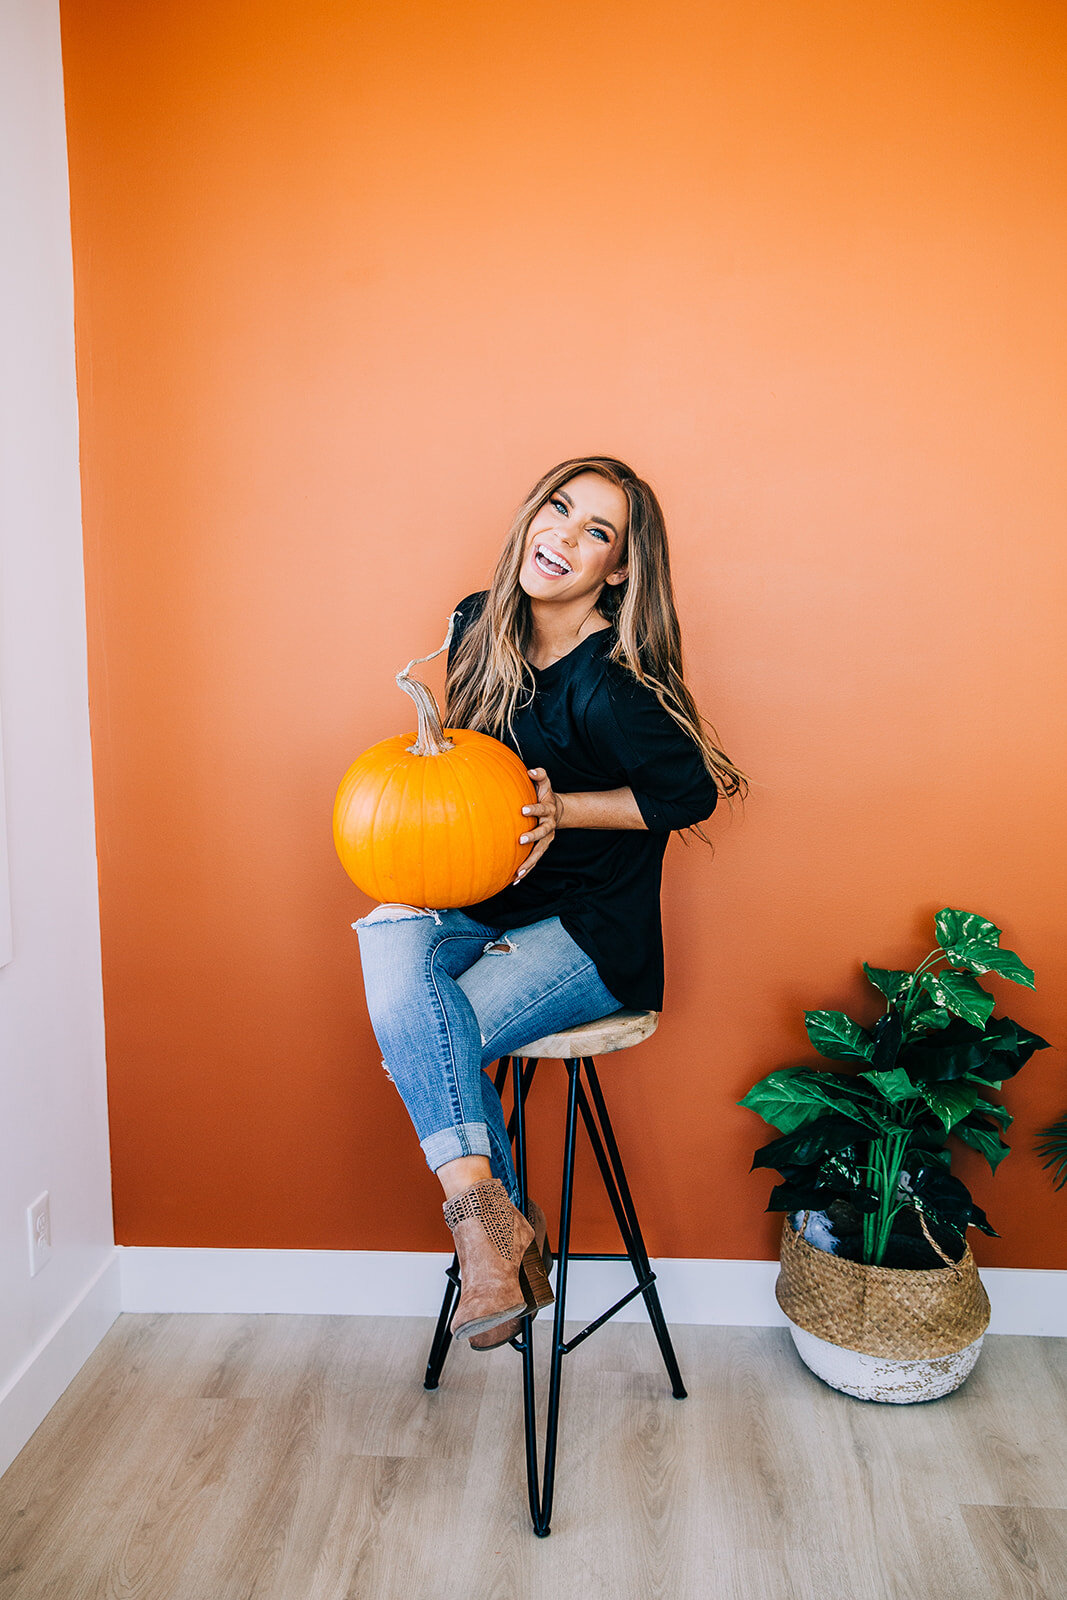  fall product photos new inventory posing with a pumpkin against a coral wall station studio natural light studio in river heights utah logan utah product photography commercial photographer bella alder modest fashion boutique online inventory fall l